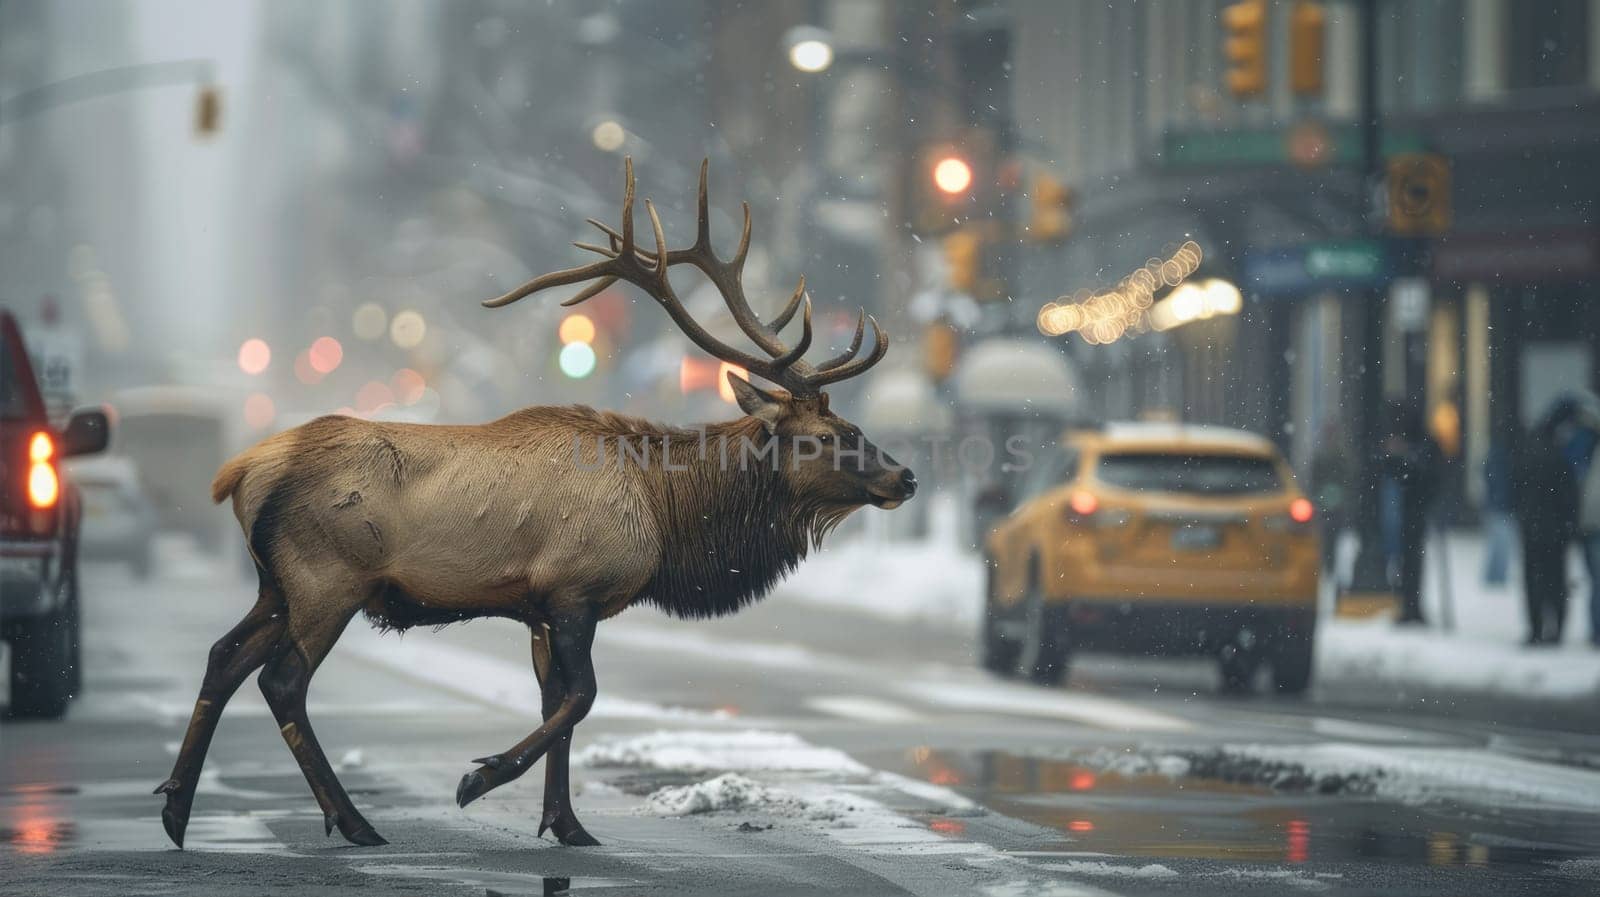 Elk wandering the city streets by natali_brill